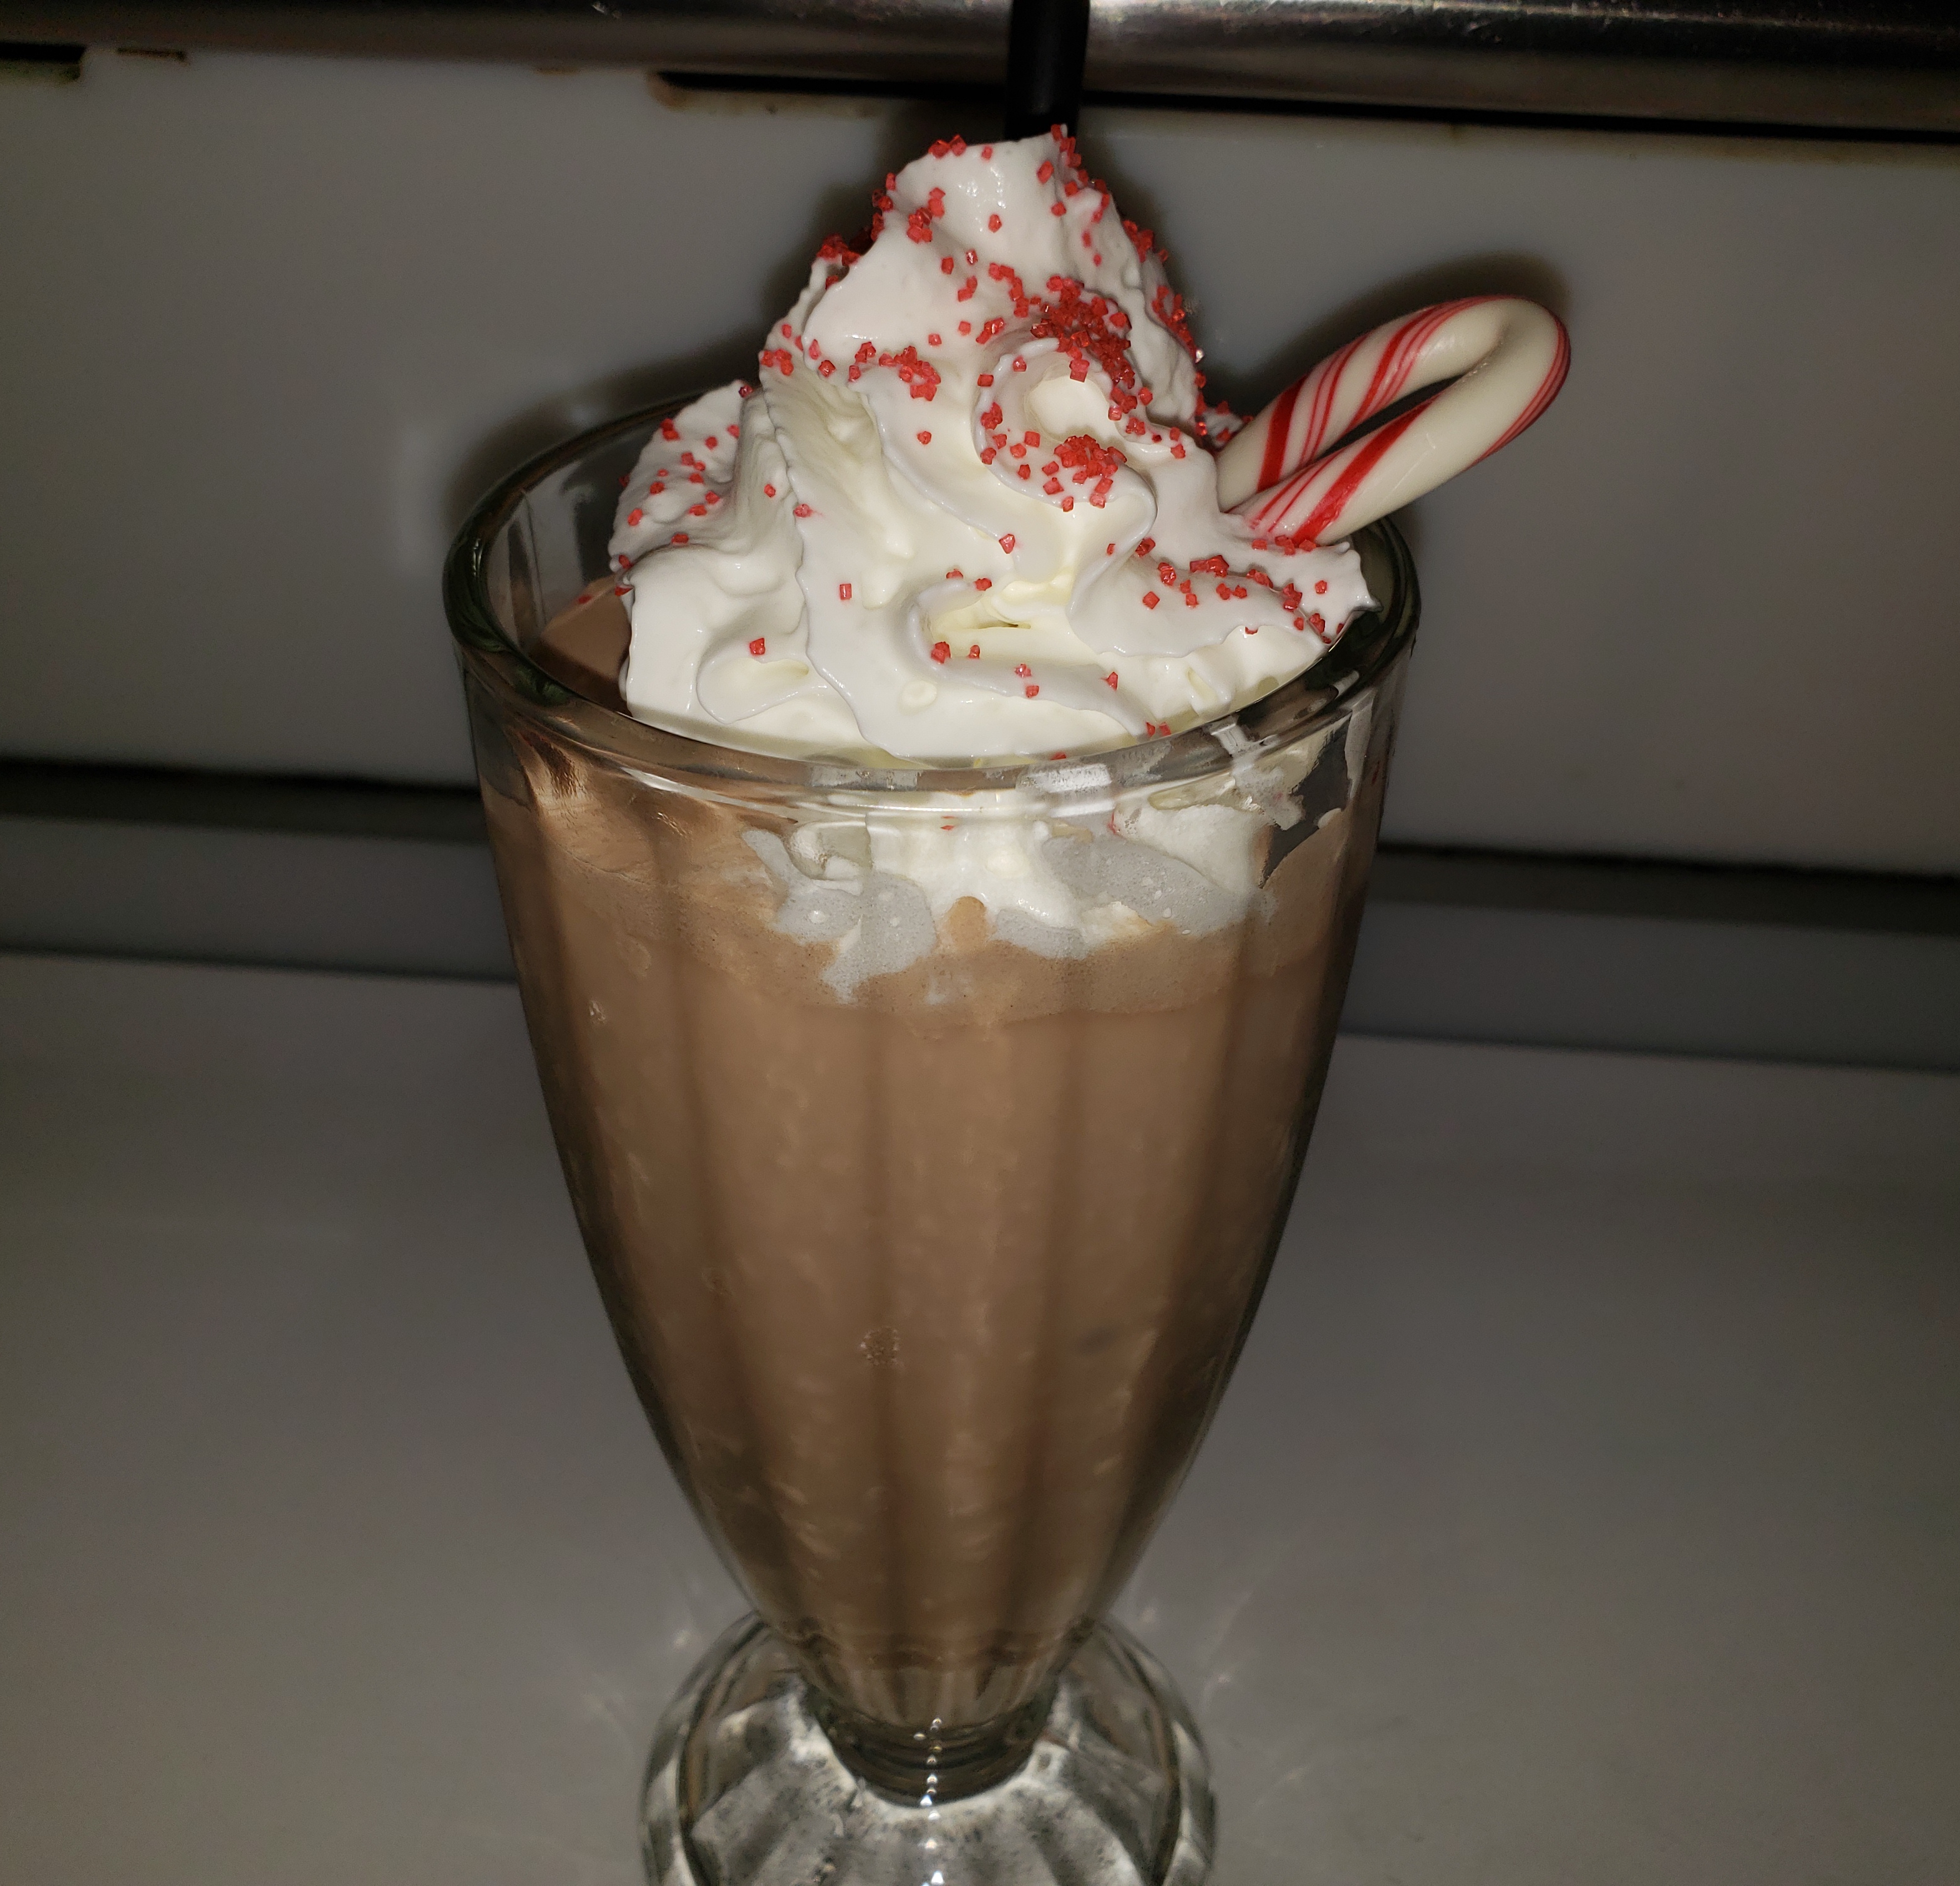 Drive In For a Sci-Fi Dine-In Chocolate Peppermint Shake